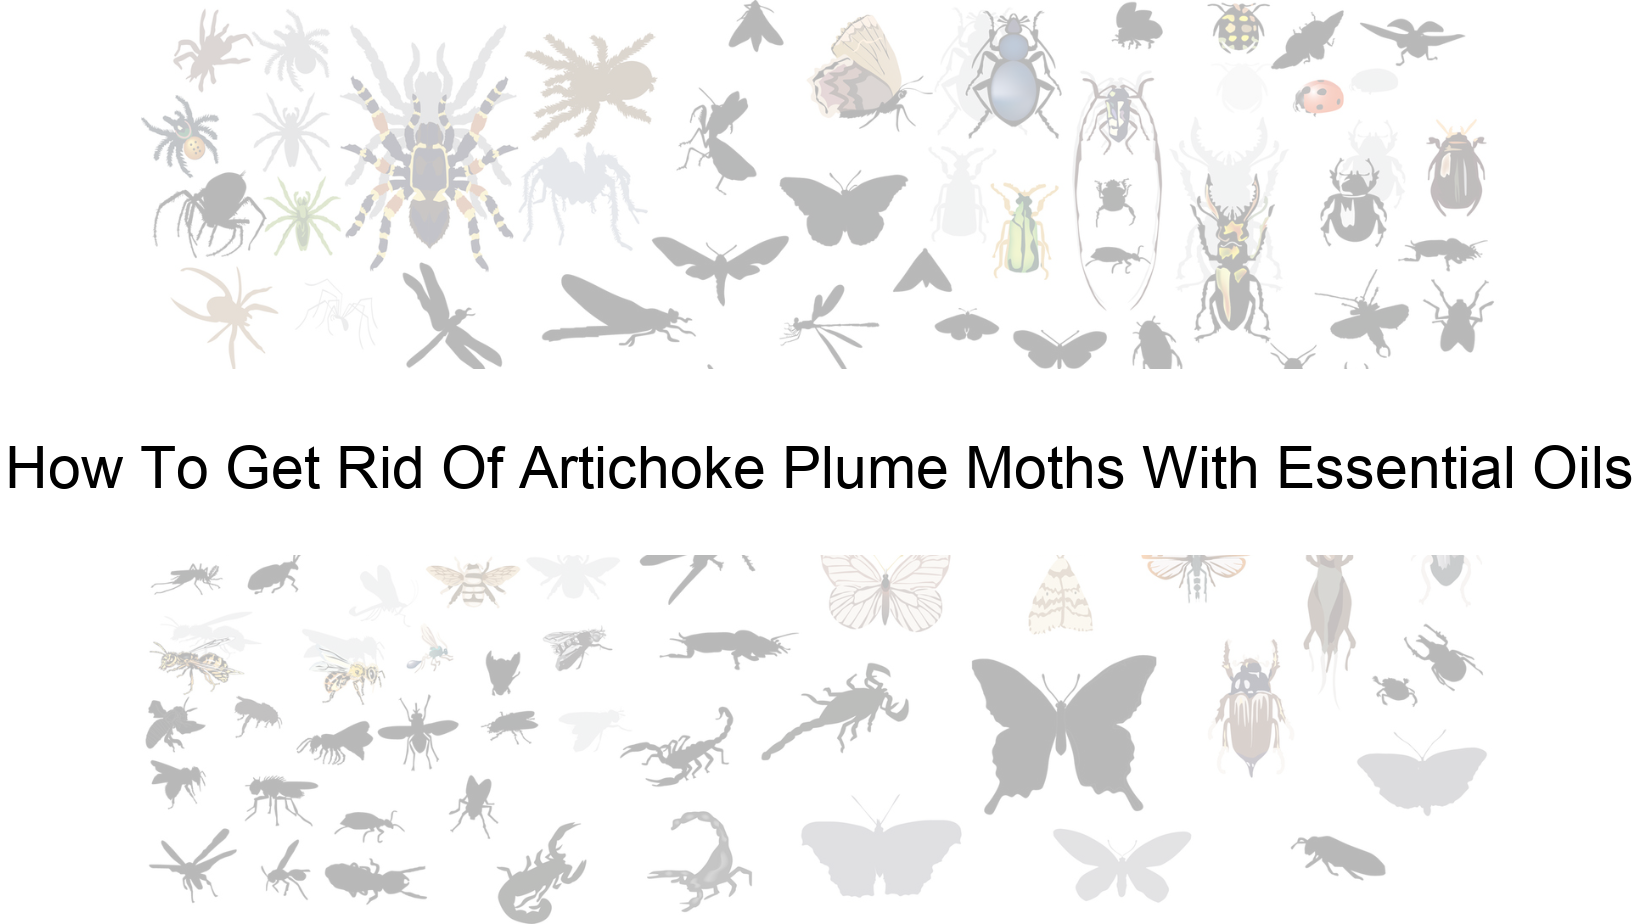 https://onessentialoils.com/wp-content/uploads/2023/04/How-To-Get-Rid-Of-Artichoke-Plume-Moths-With-Essential-Oils.png